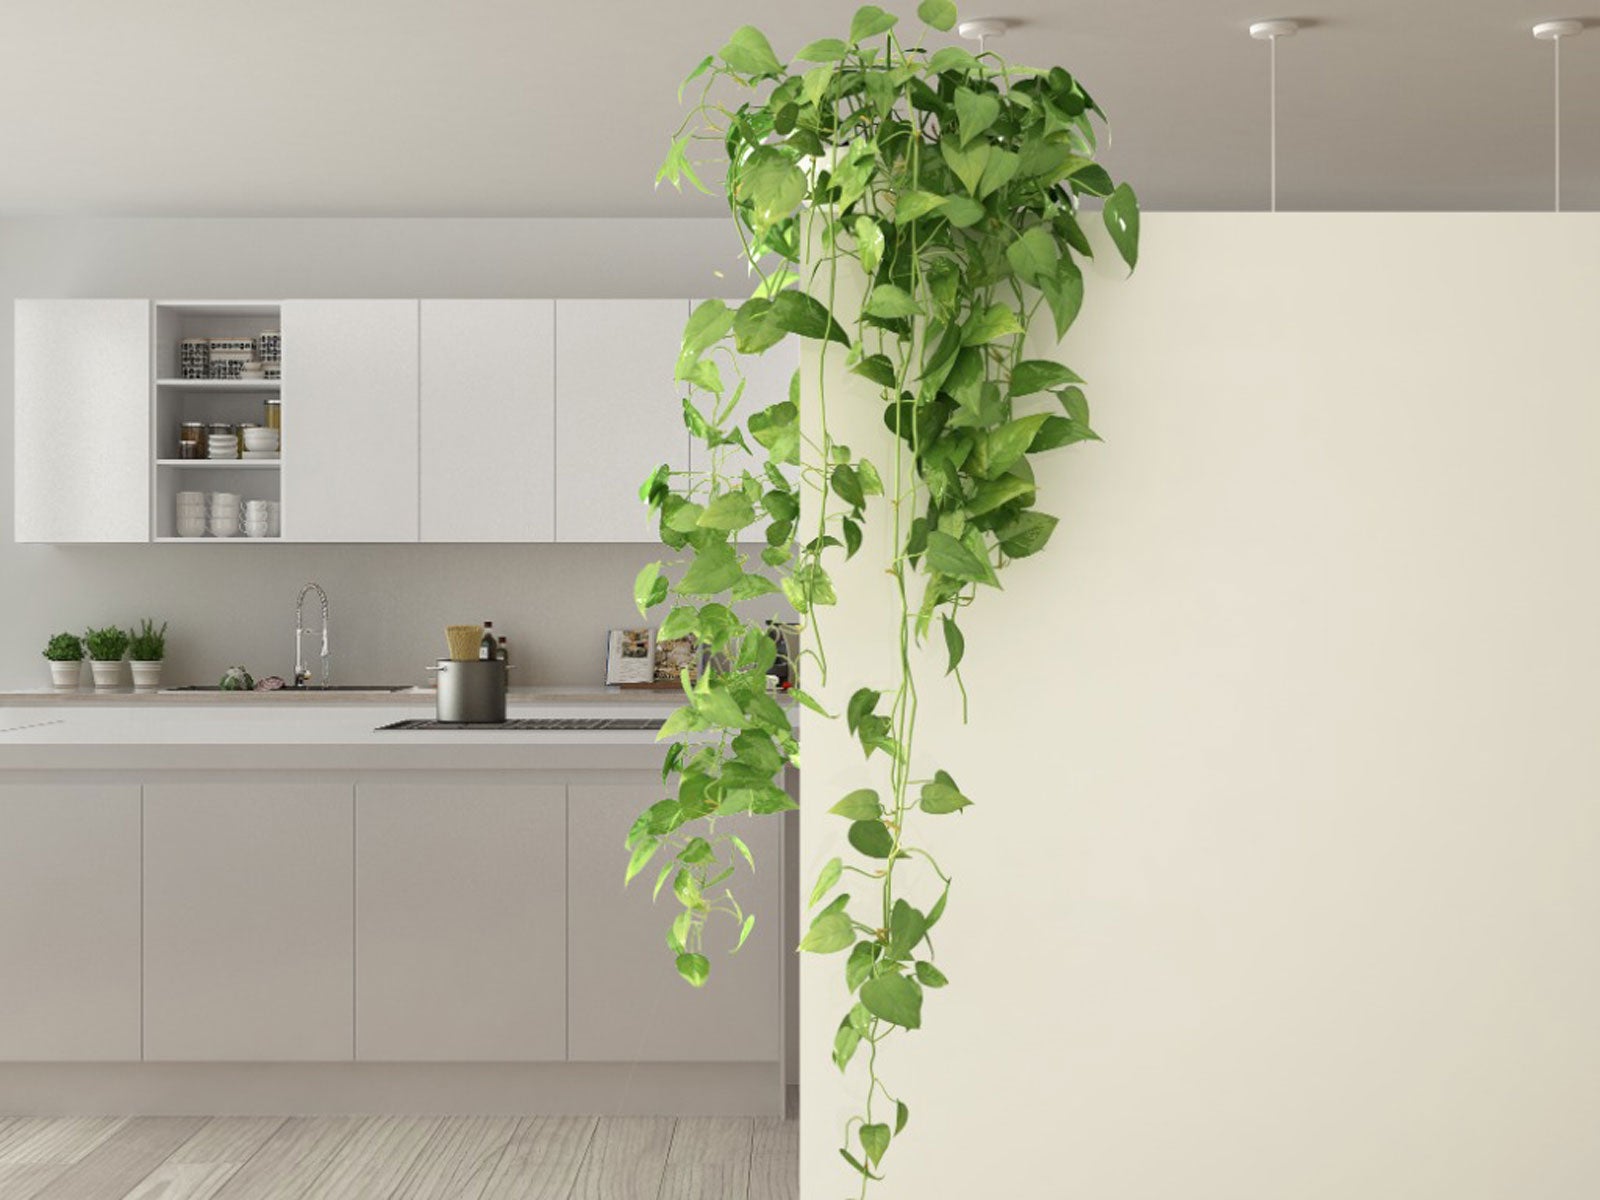 Indoor Climbing Plants How To Grow Climbing Houseplants,Anniversary Ideas For Him At Home